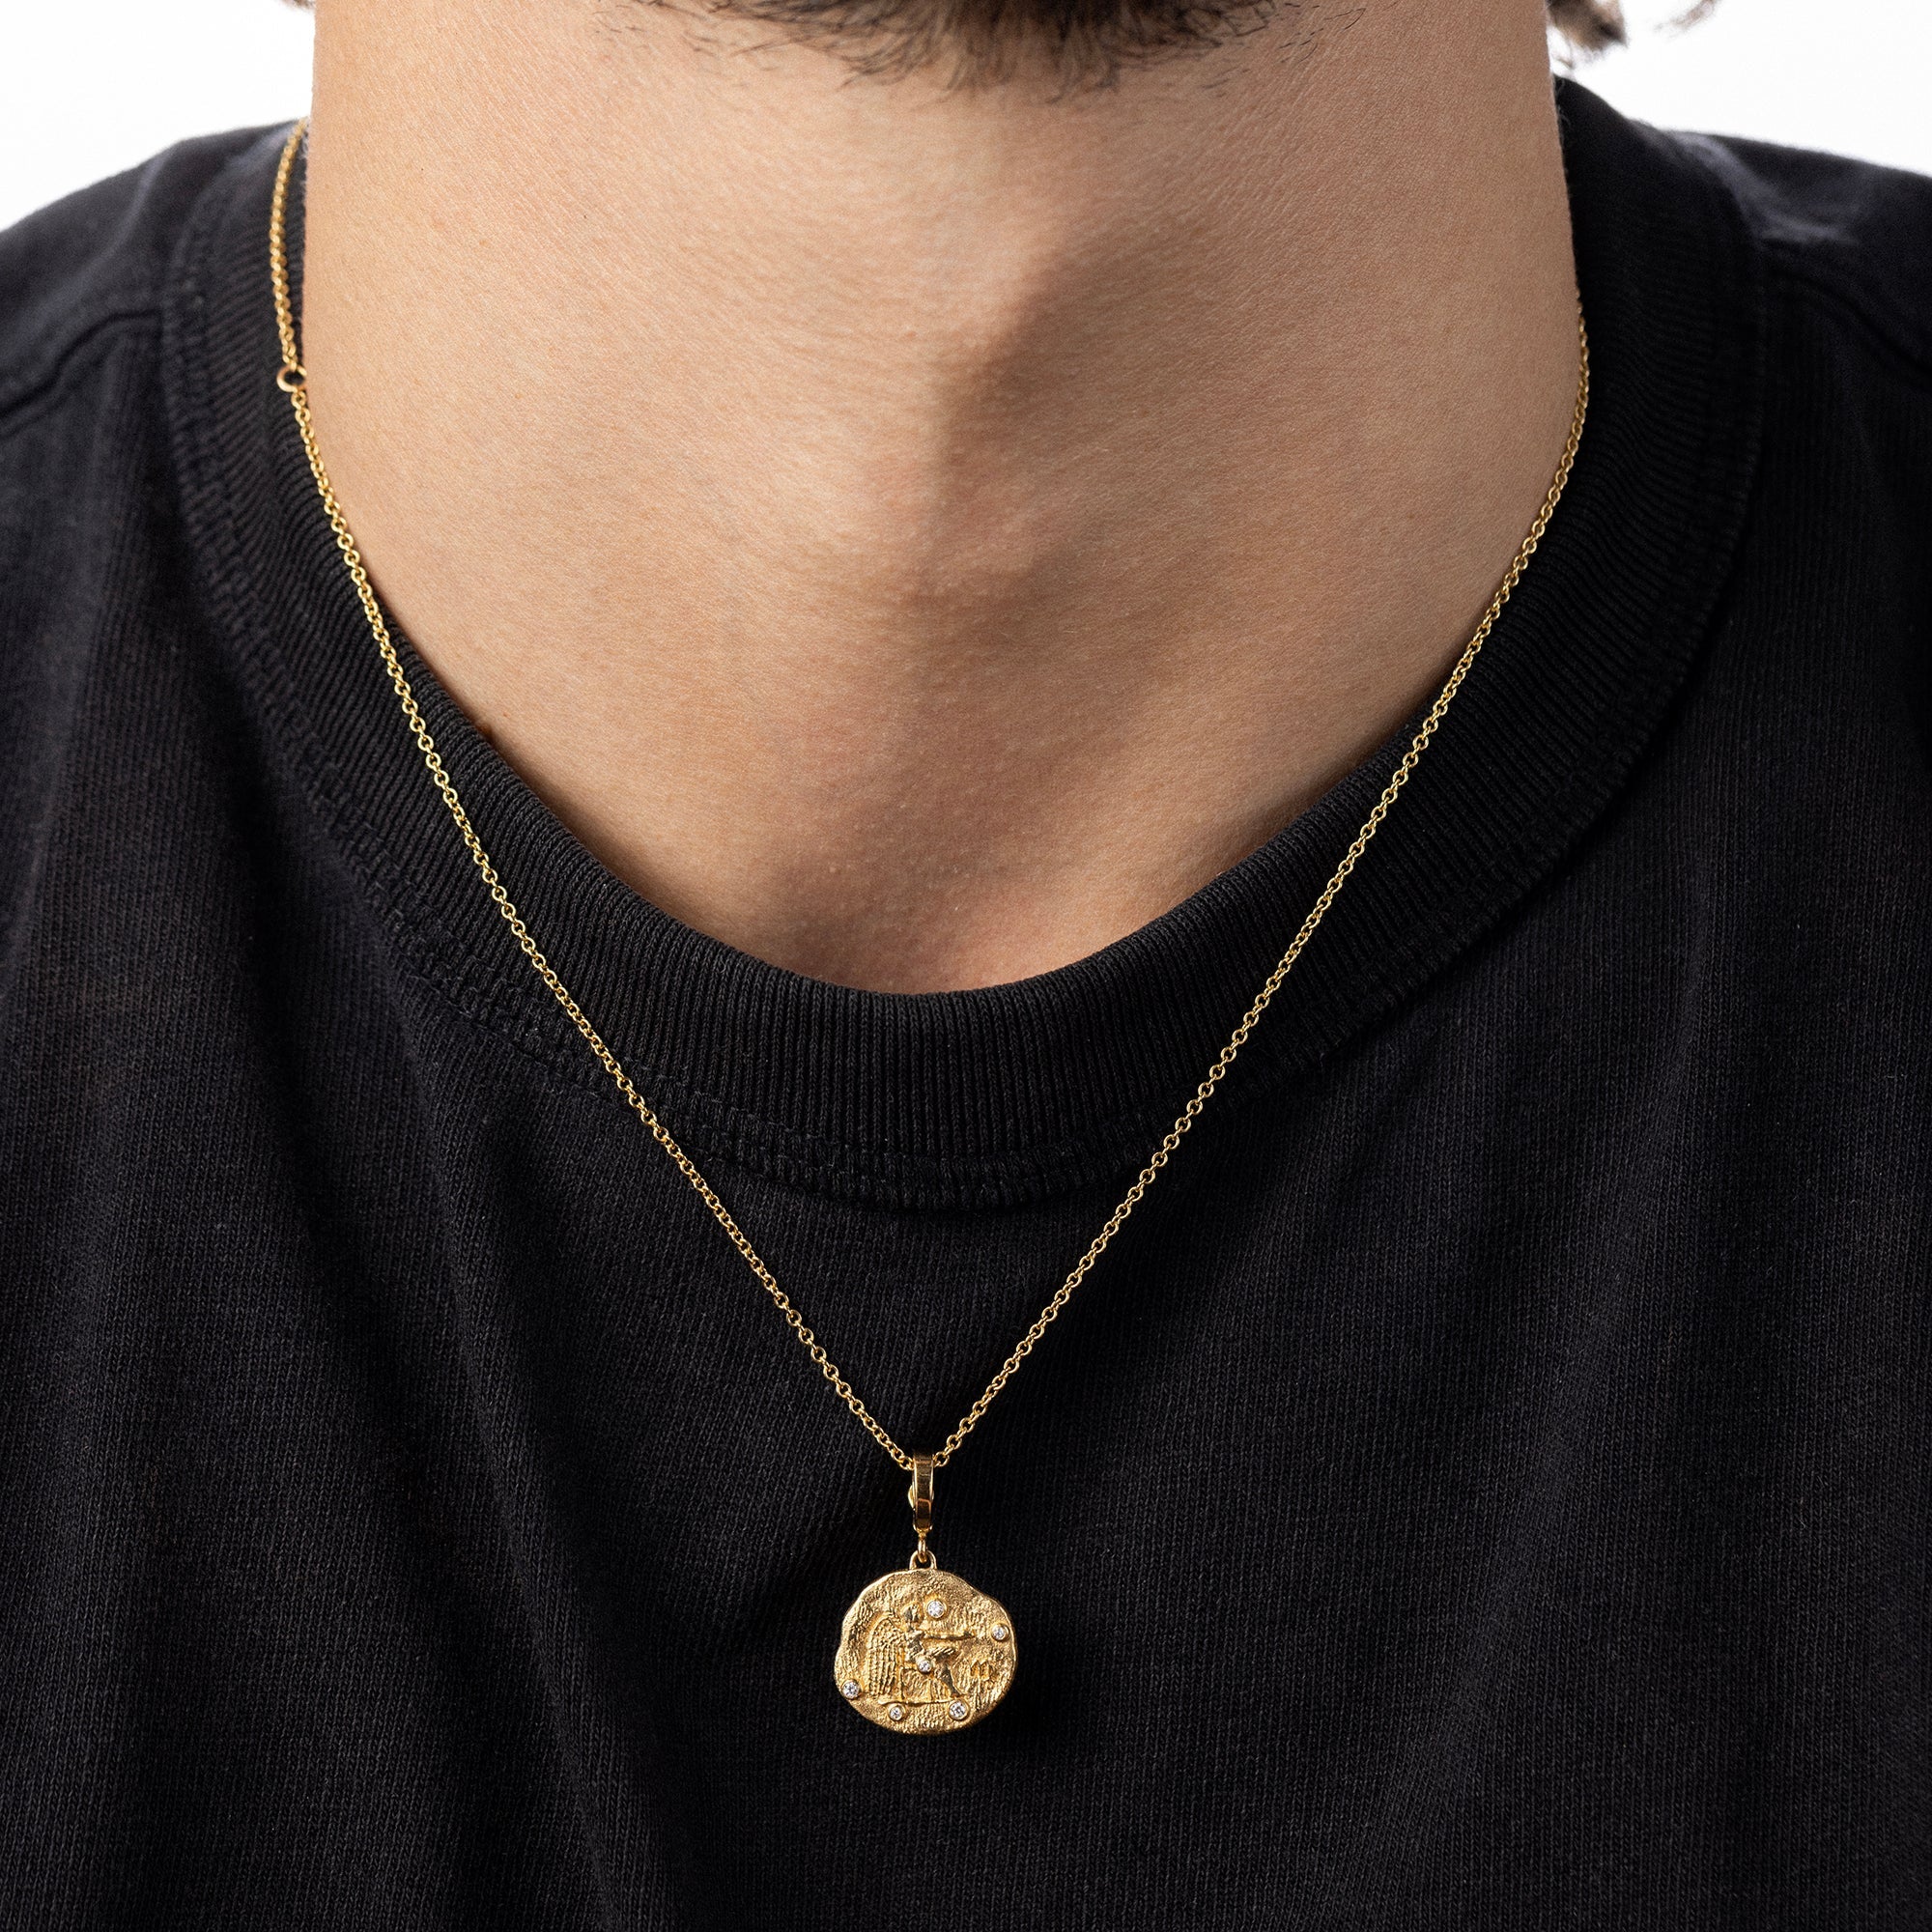 Of The Stars Capricorn Small Coin Necklace